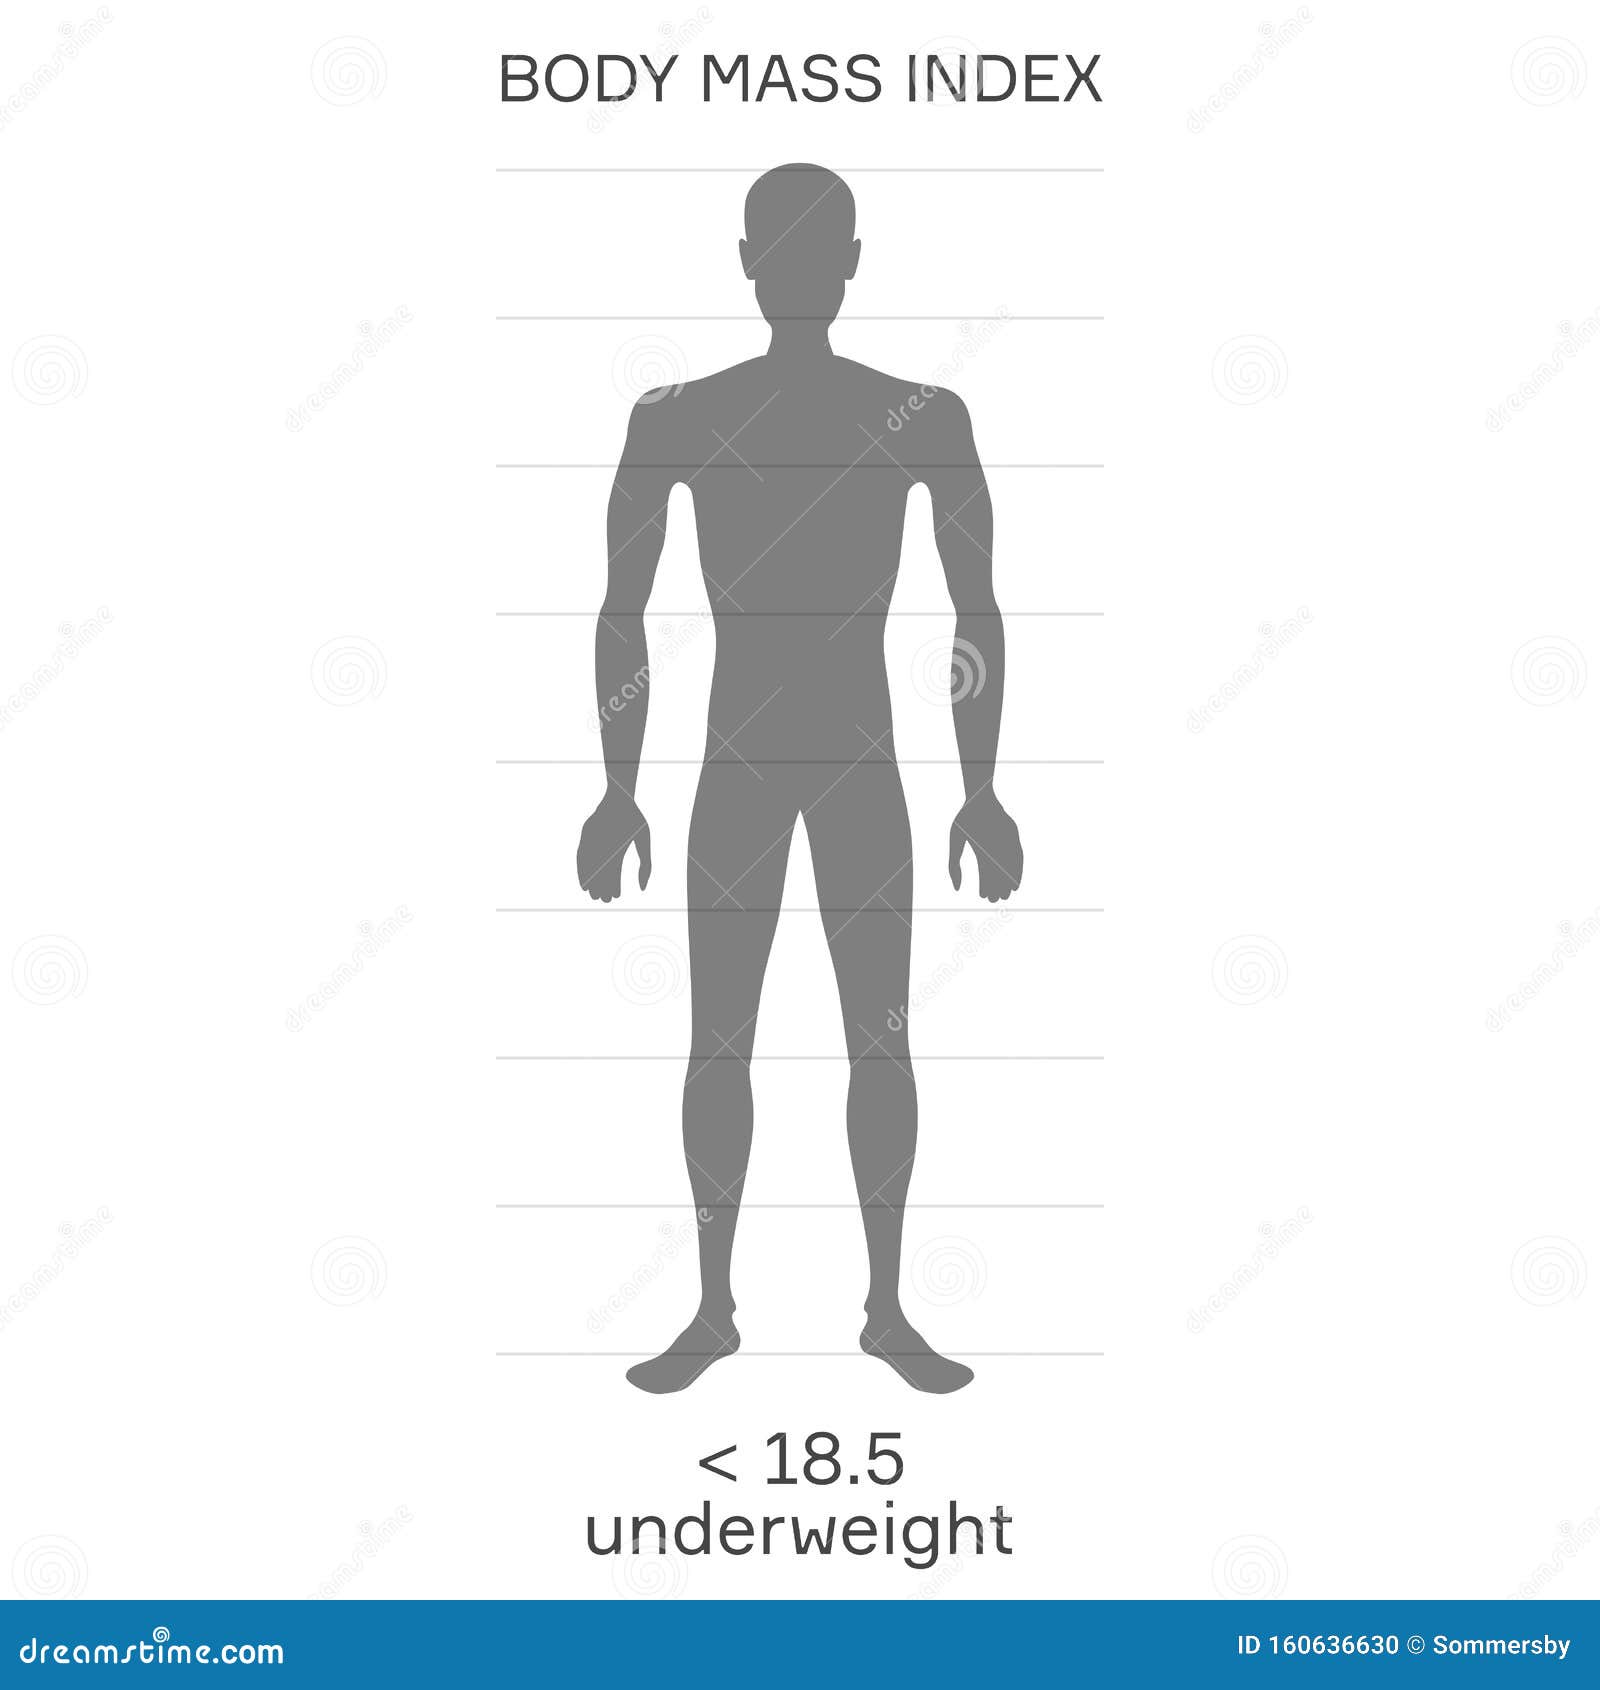 characterizing male silhouette for underweight stage of body mass index